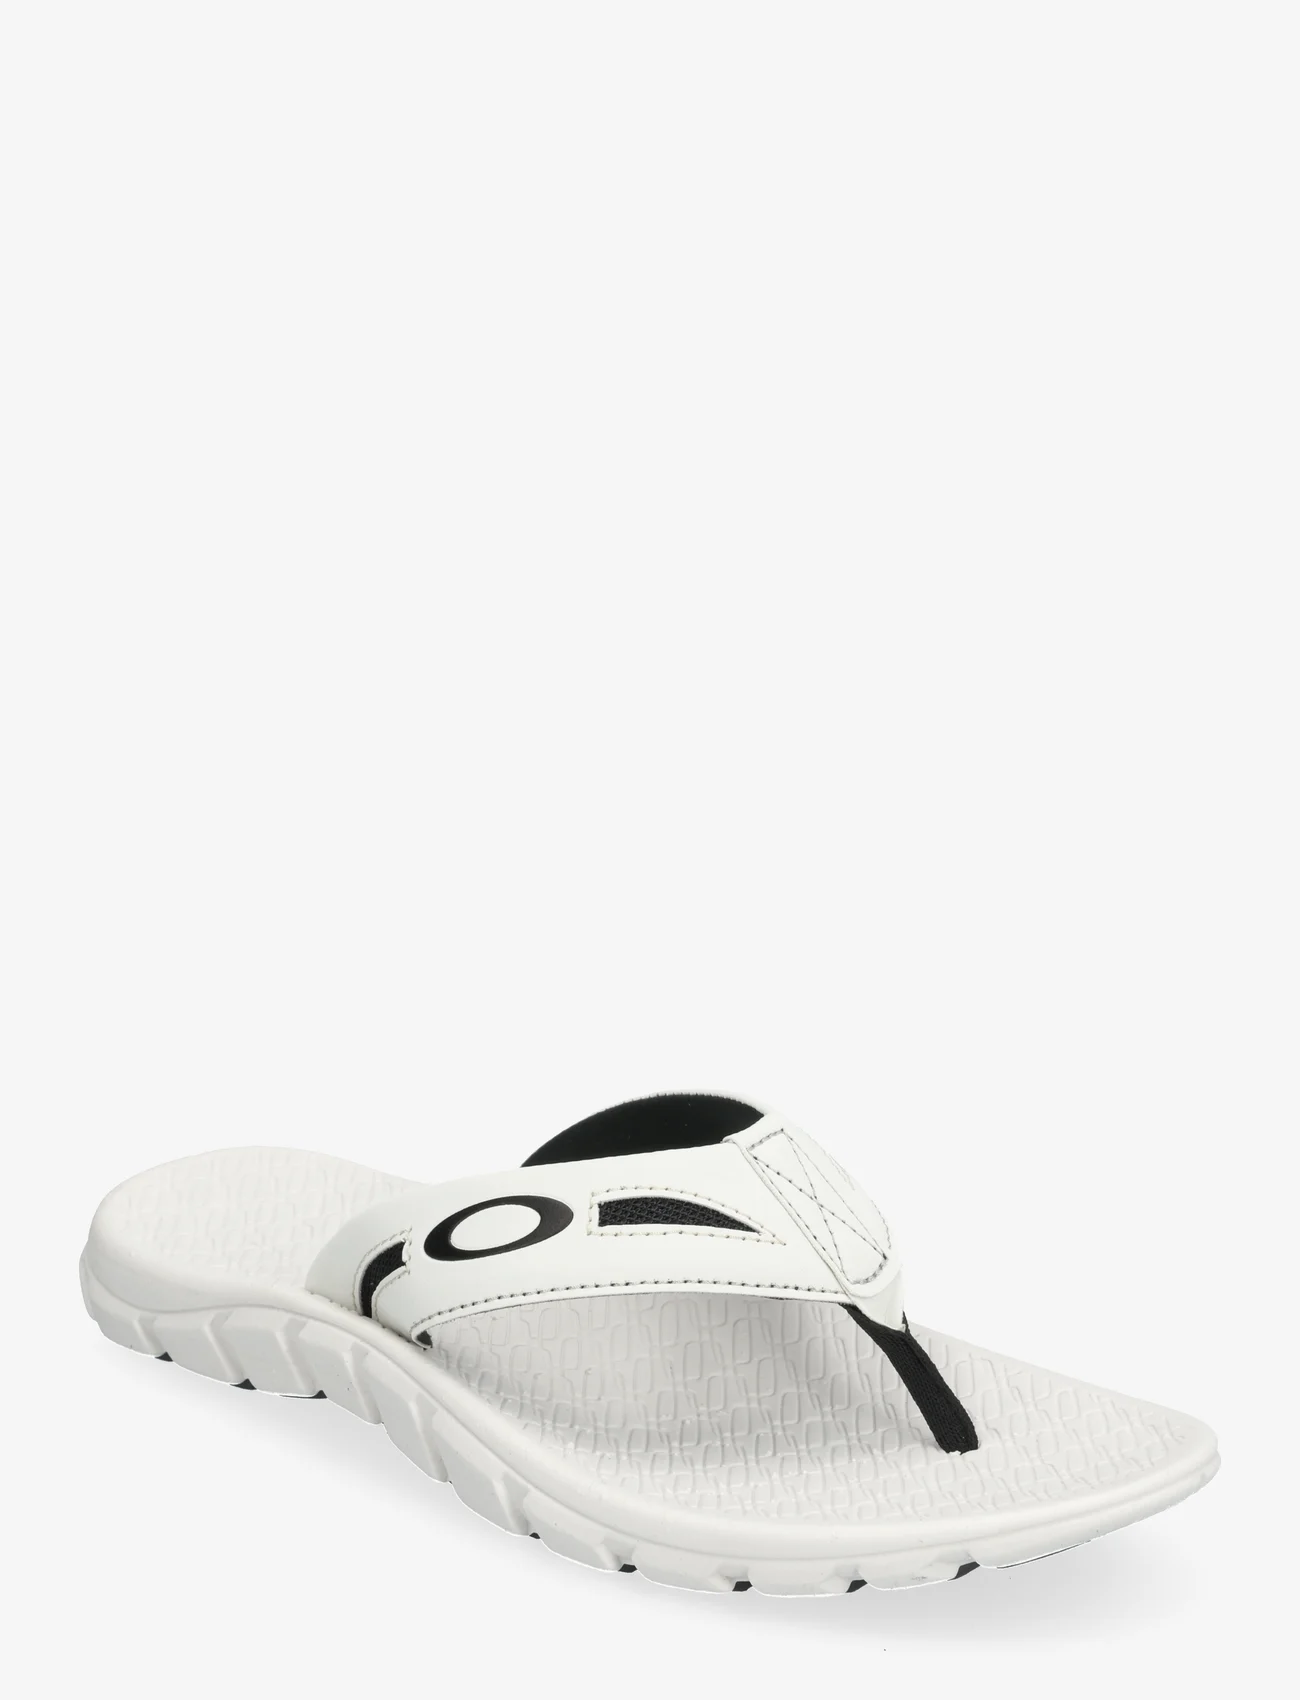 Oakley Sports - OPERATIVE SANDAL 2.0 - lowest prices - white - 0